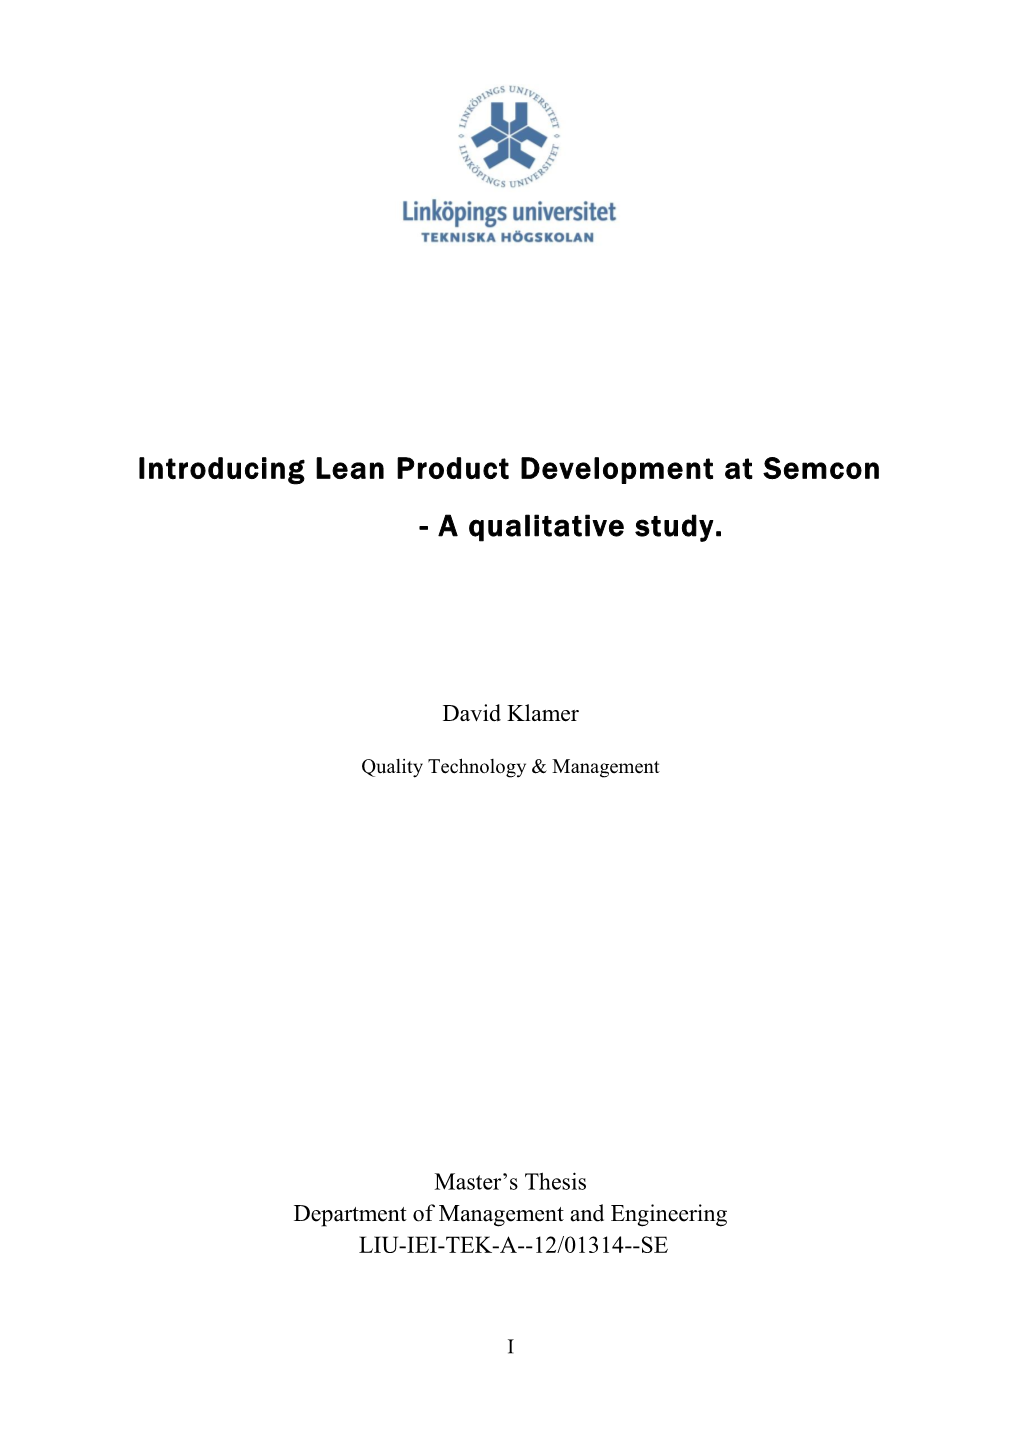 Introducing Lean Product Development at Semcon - a Qualitative Study